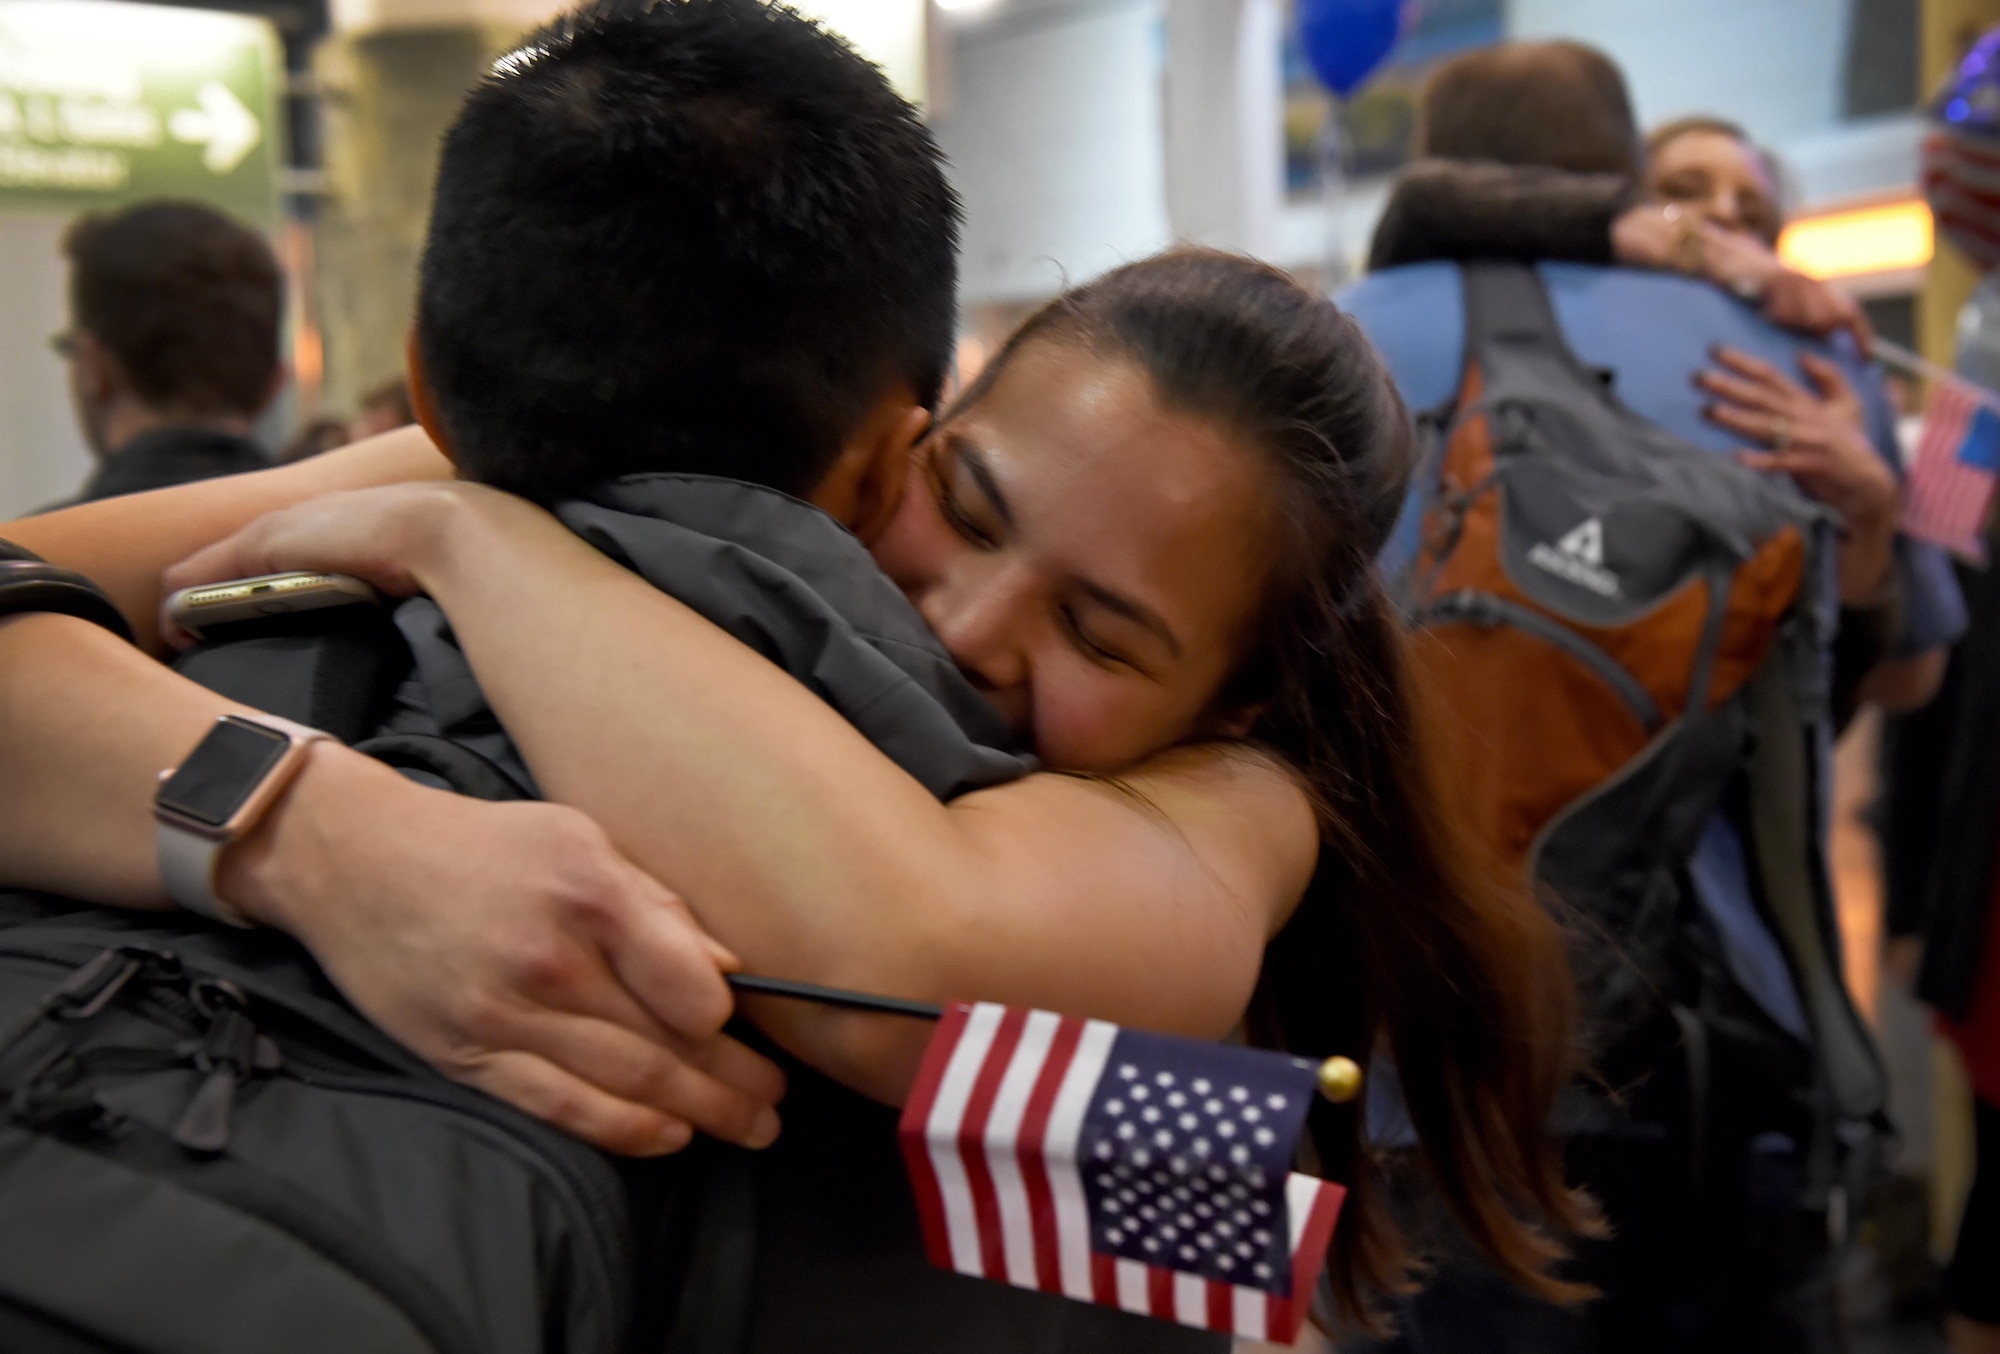 Sonia Munn embraces her spouse following his return from a deployment at the Ted Stevens International Airport, Anchorage, Alaska, Jan. 13, 2017. A group of service members of the 302d Fighter Squadron and the 525th Fighter Squadron returned from a deployment to Southwest Asia. 